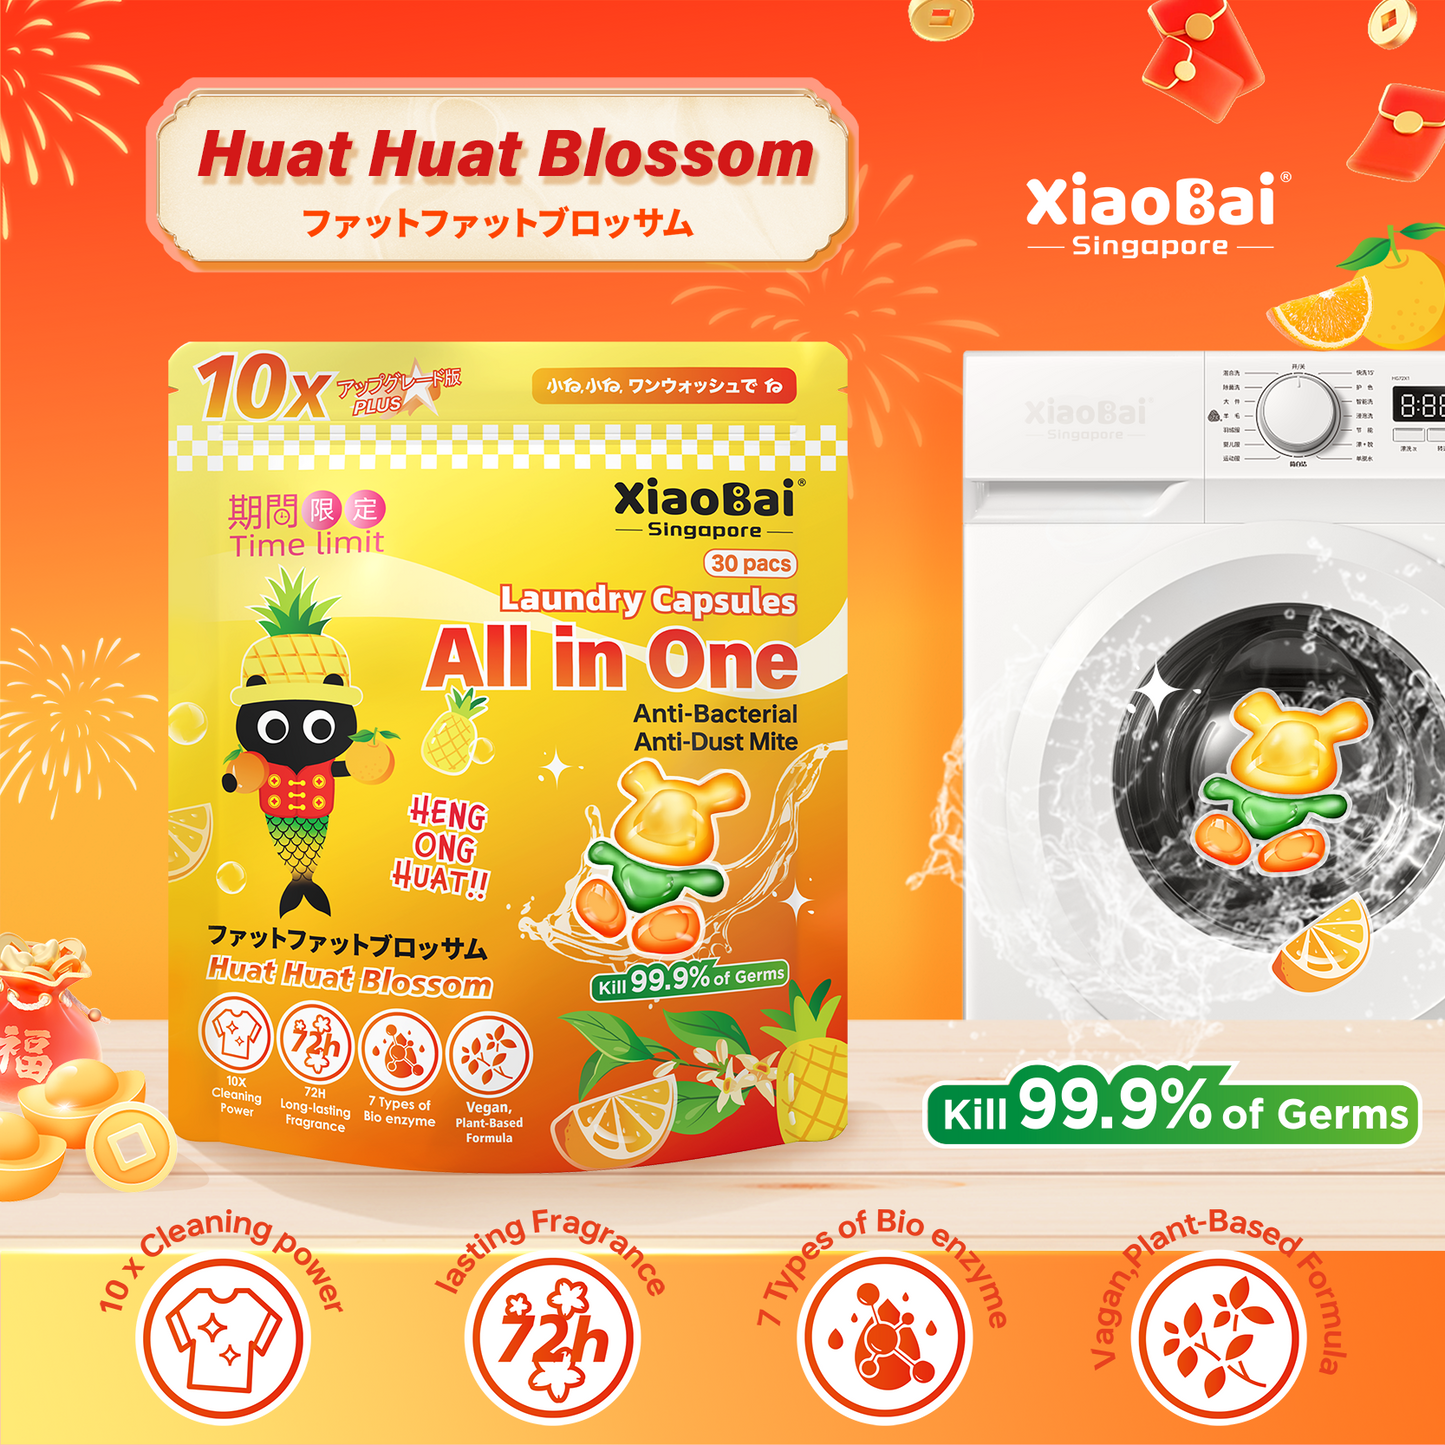 Limited edition 1 For 1 !!! XIAO BAI ALL IN ONE LAUNDRY CAPSULES -L8 Huat Huat Blossom